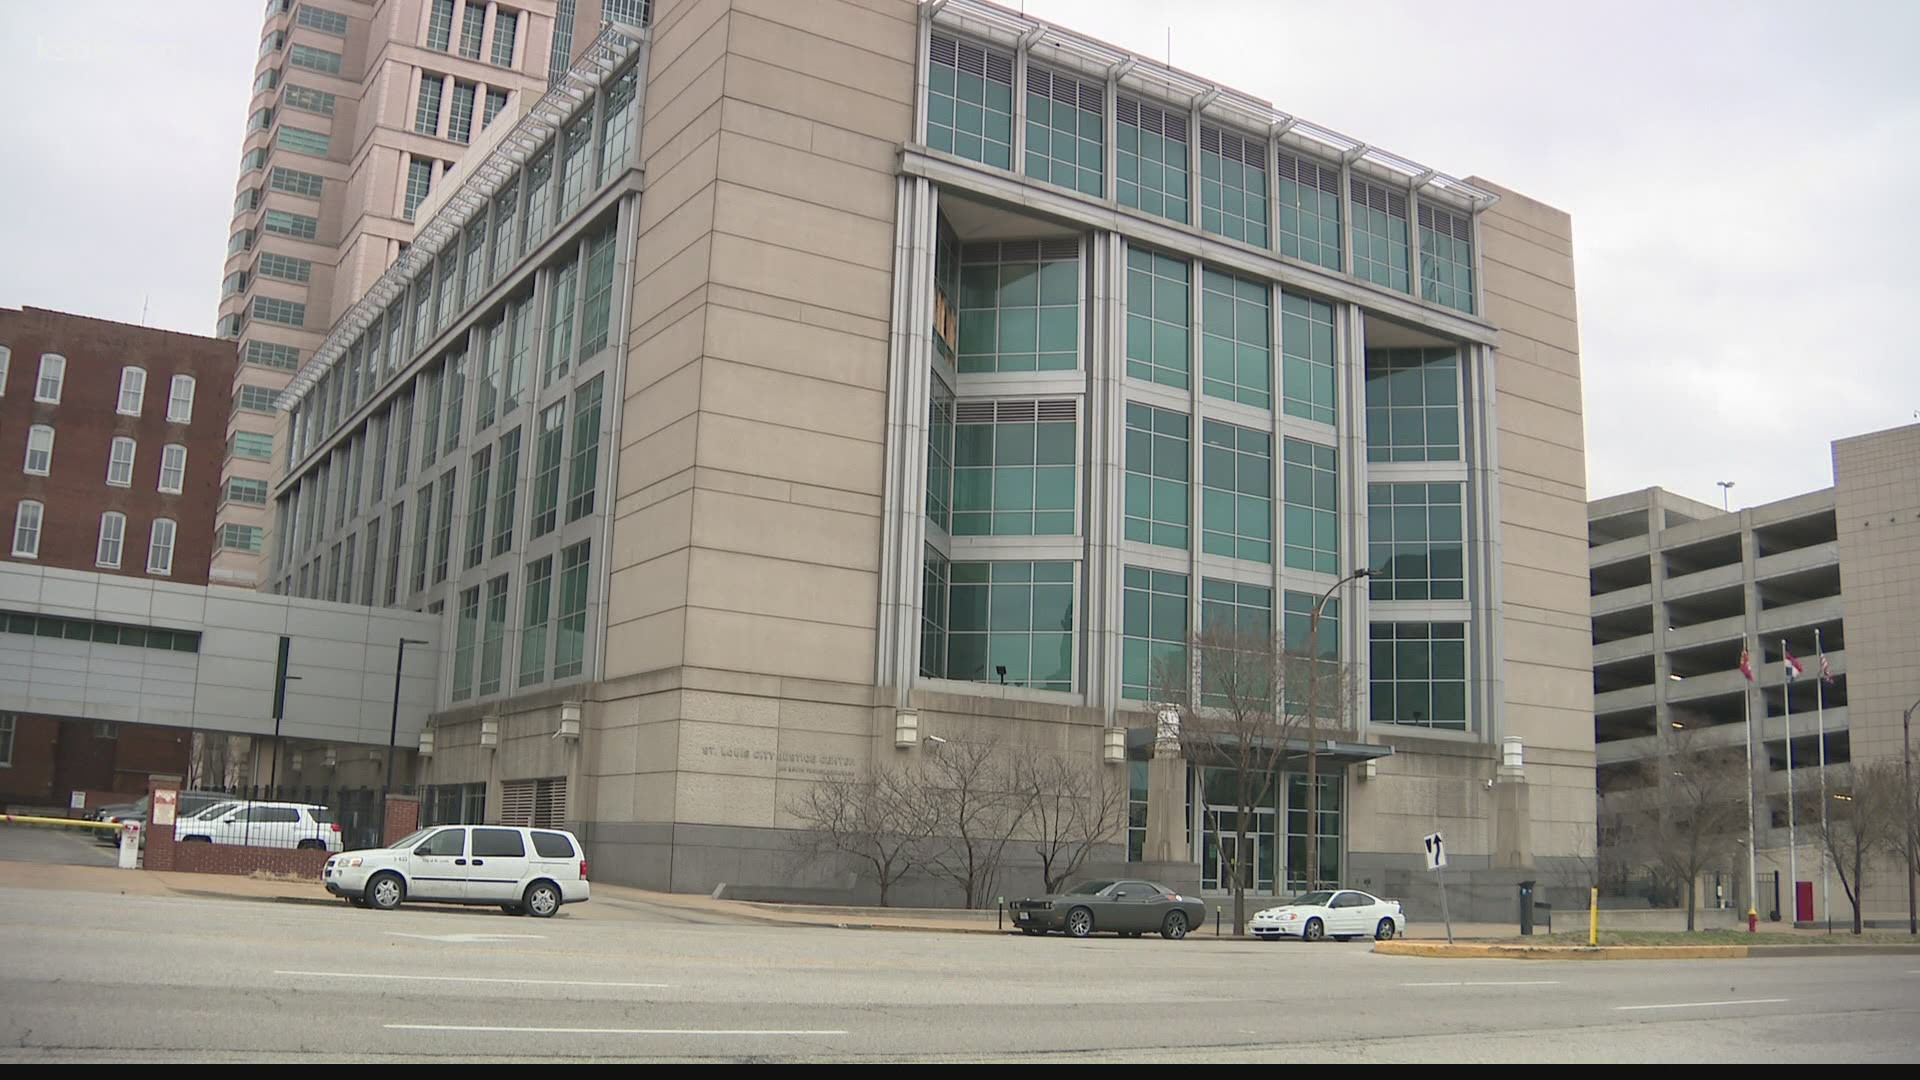 City Justice Center was the site of two riots earlier this year